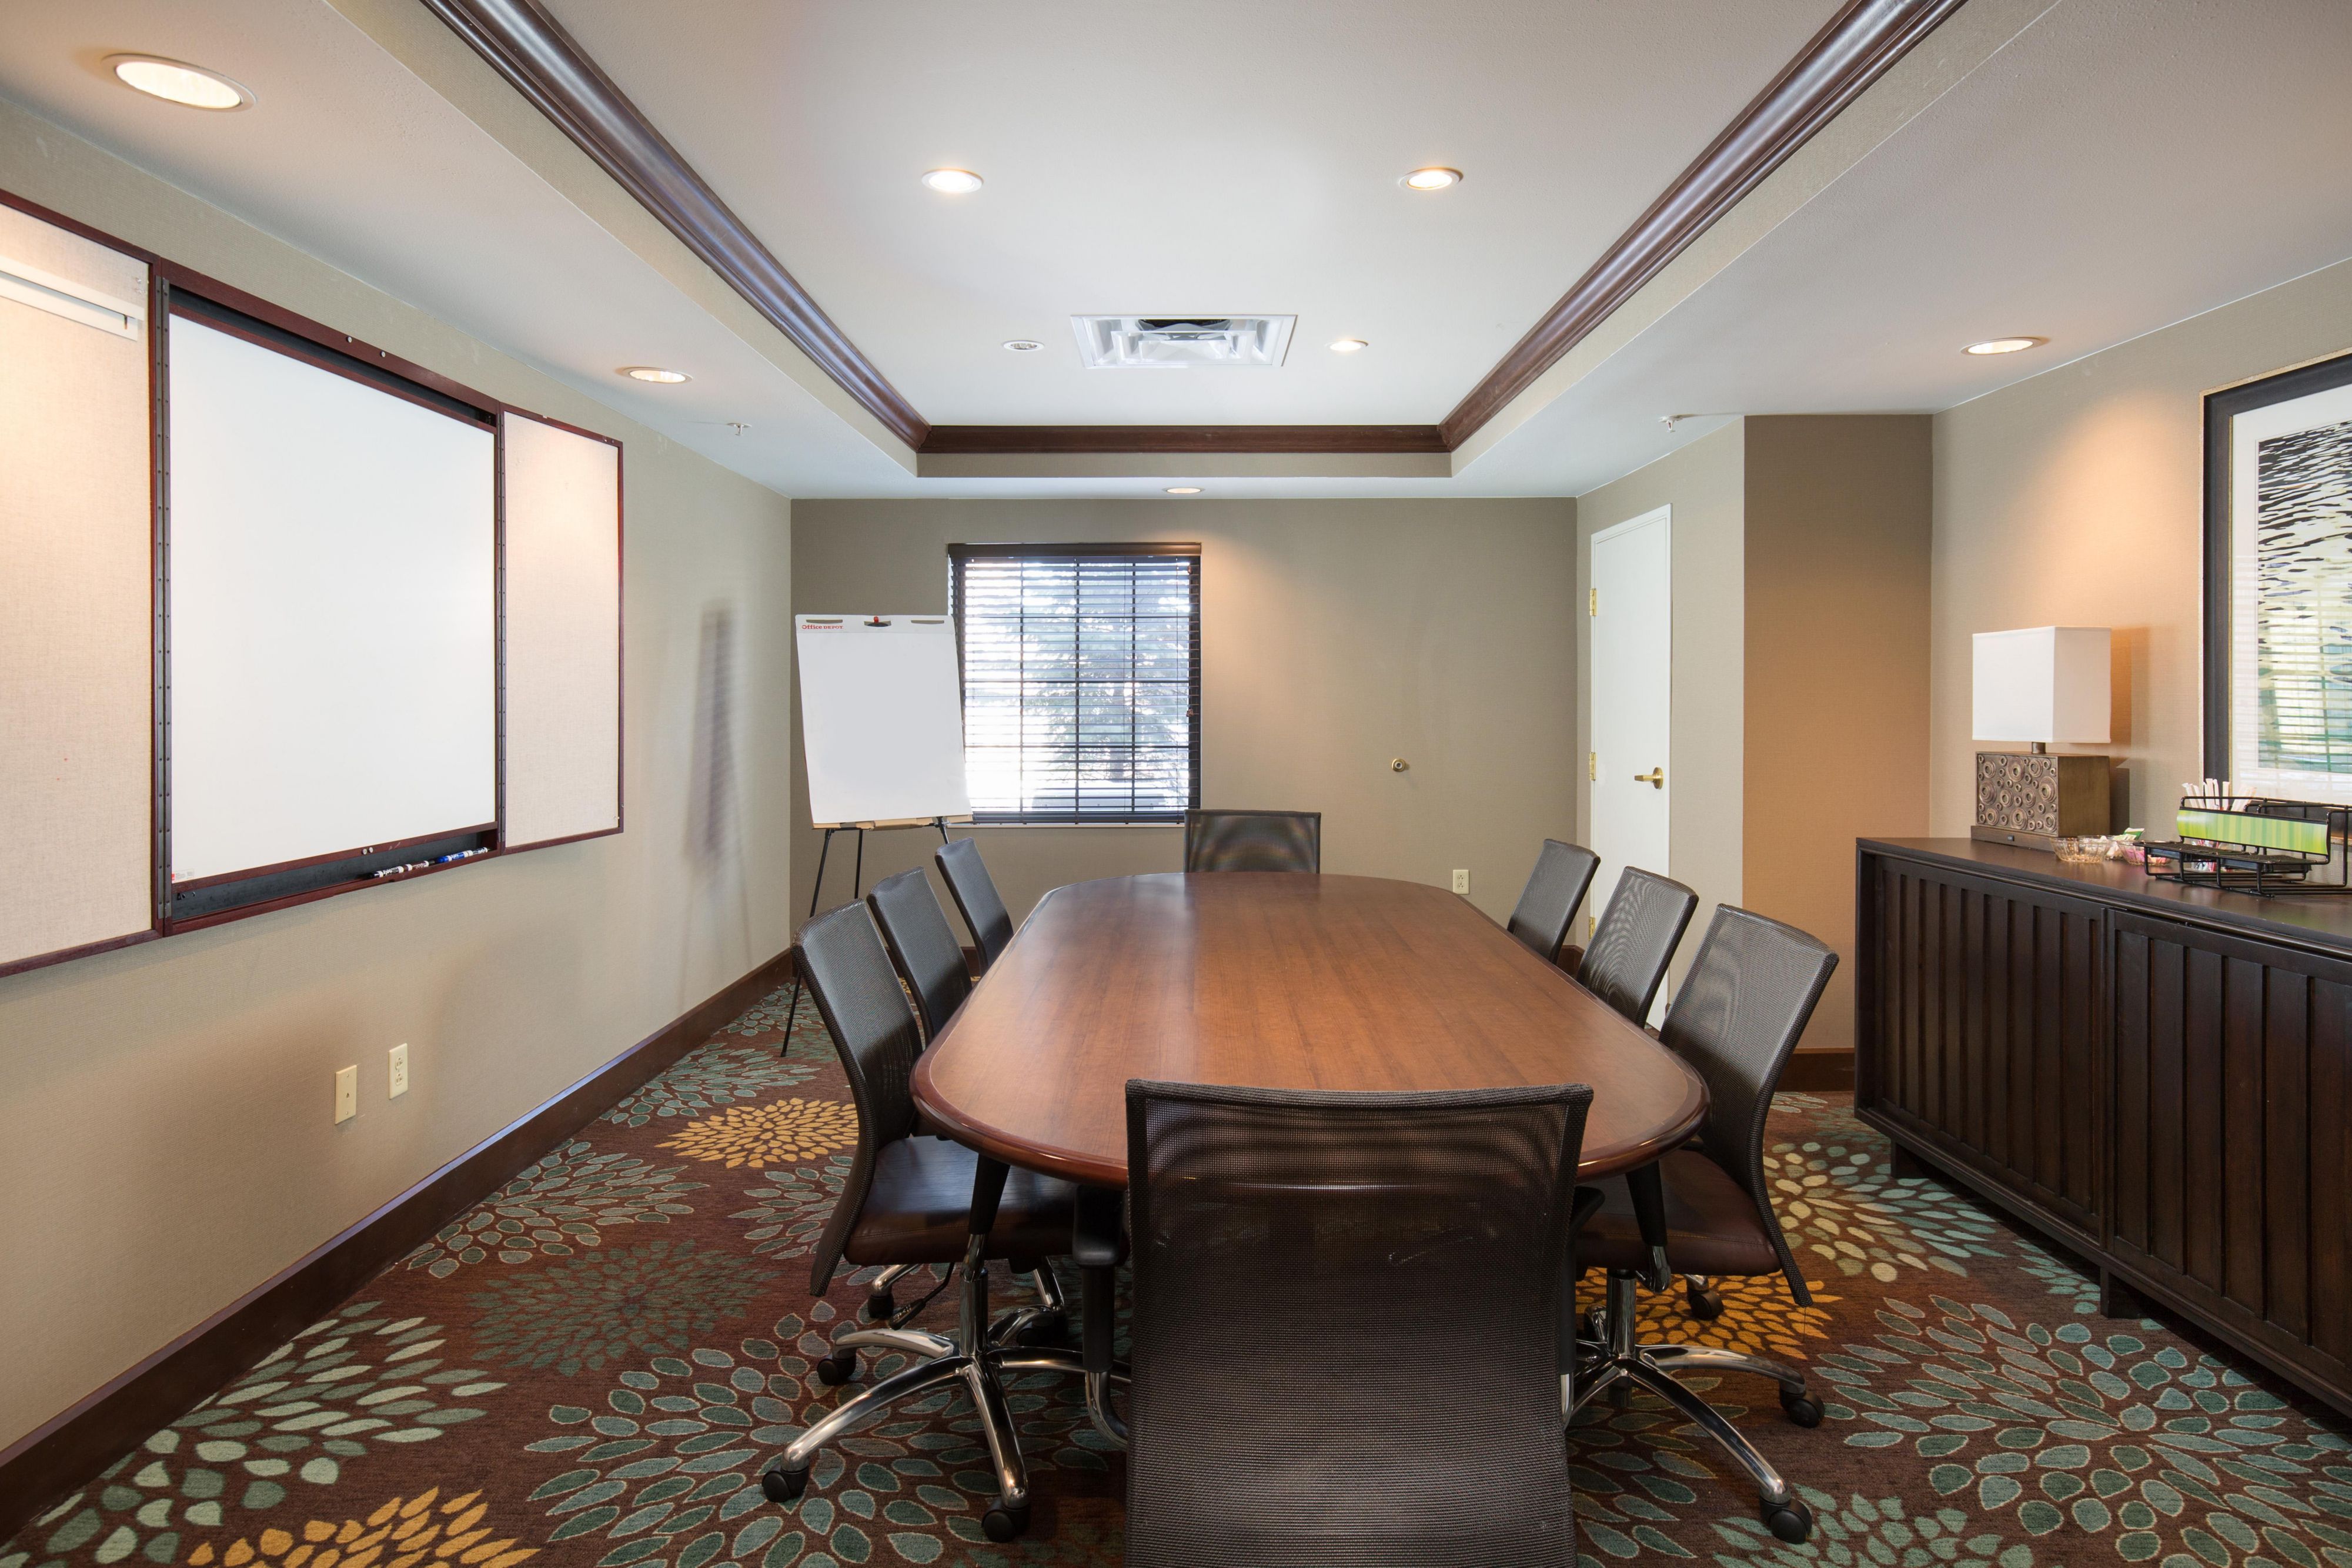 Our Executive Board Room and Conference room offer the perfect escape for your corporate meeting. Adjacent to our great room and semi-private patio, your attendees will enjoy the productivity that comes with the perfect setting for any gathering or meeting.